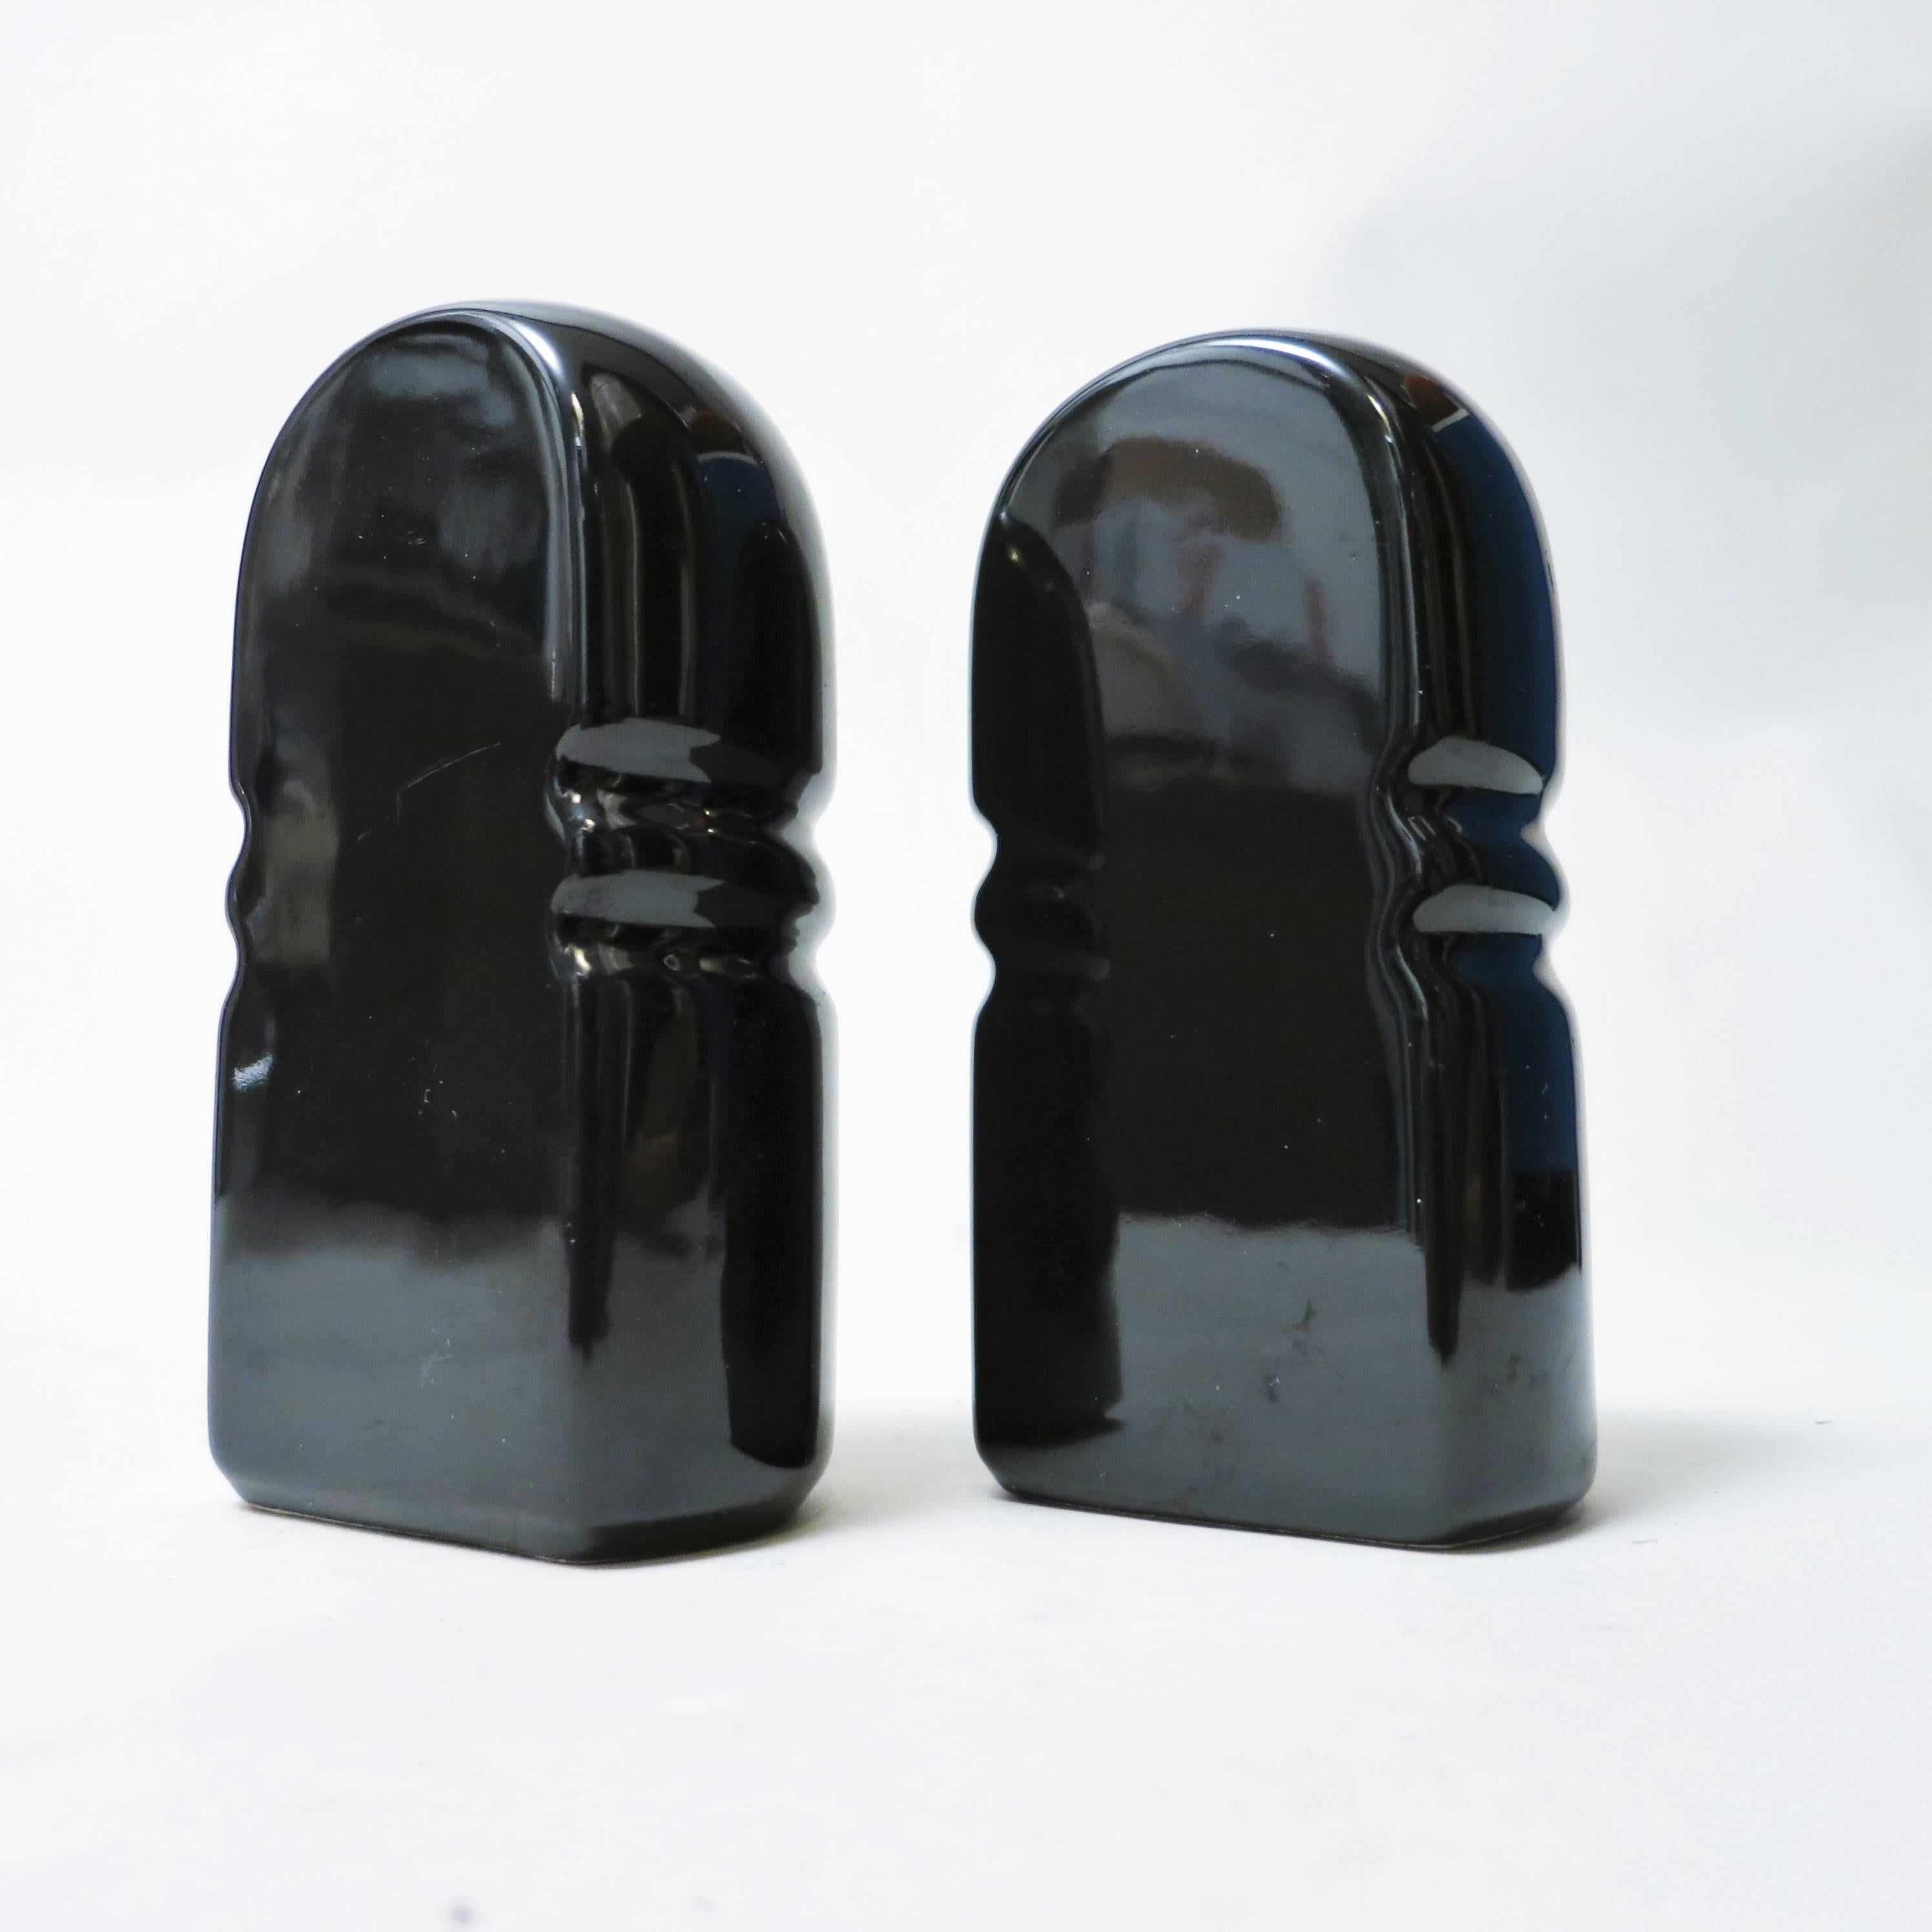 Italian Salt and Pepper Shakers by Pino Spagnolo Sicart